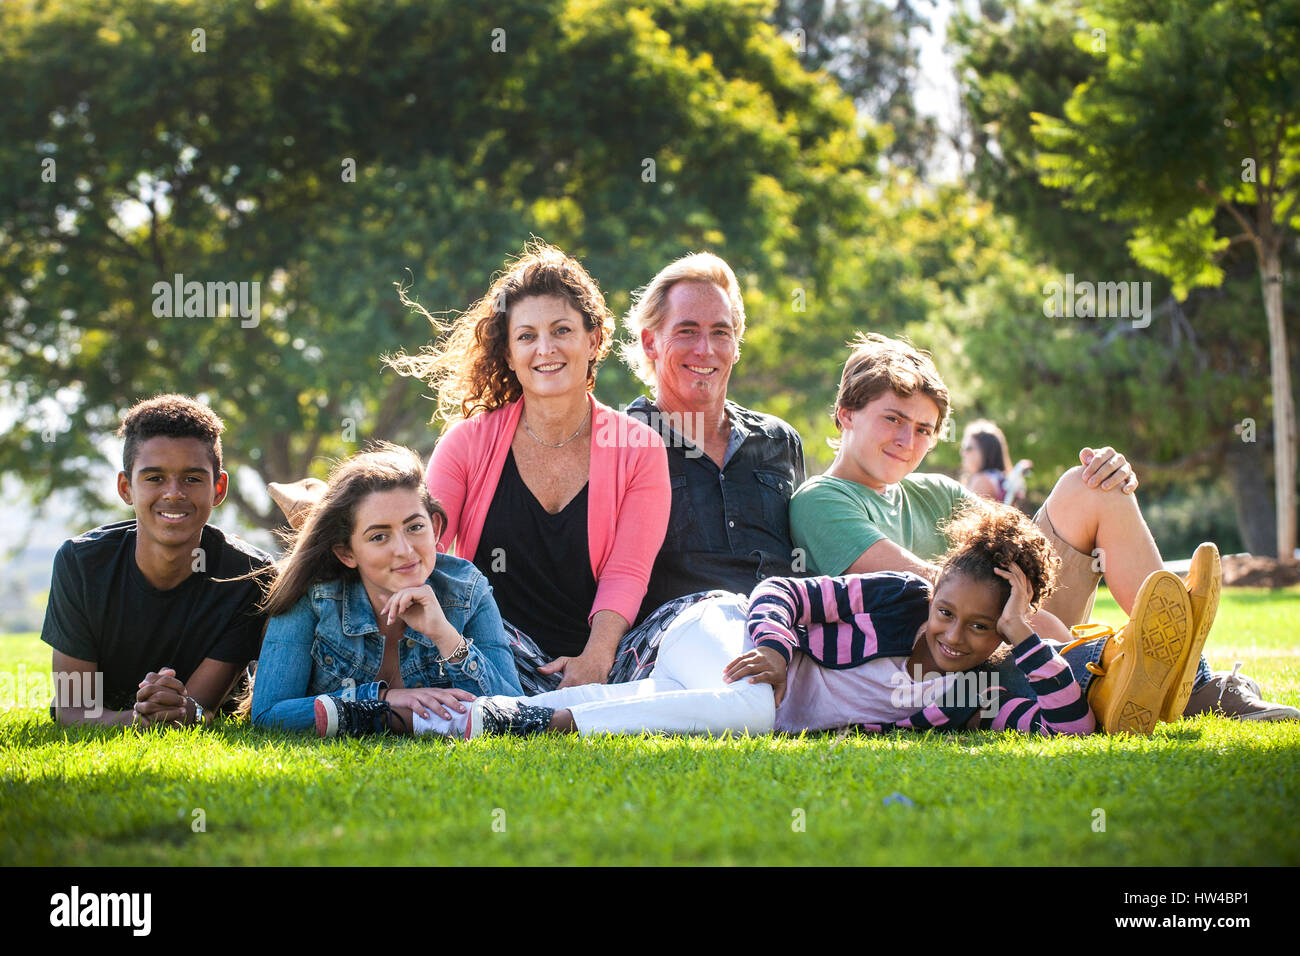 Portrait of smiling family on grass in park Stock Photo